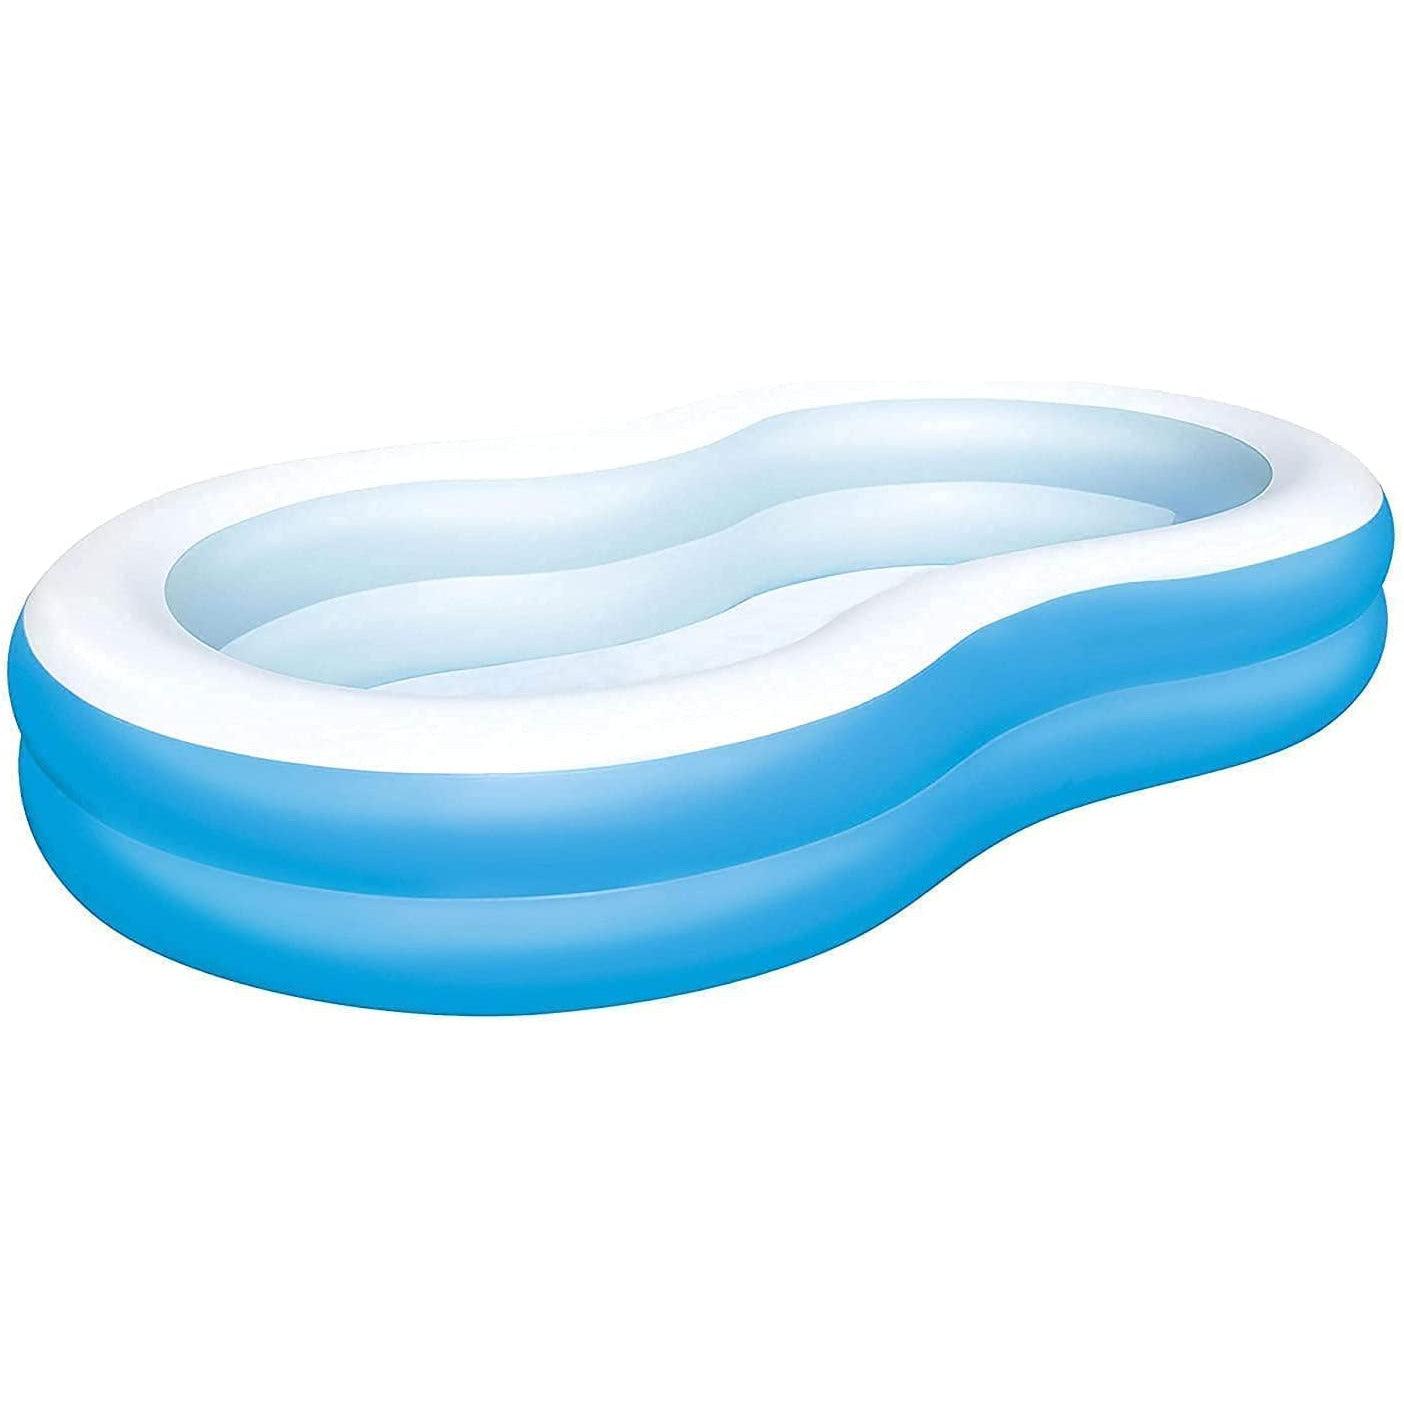 Bestway 54117 The Big Lagoon Family Pool for Kids - blue